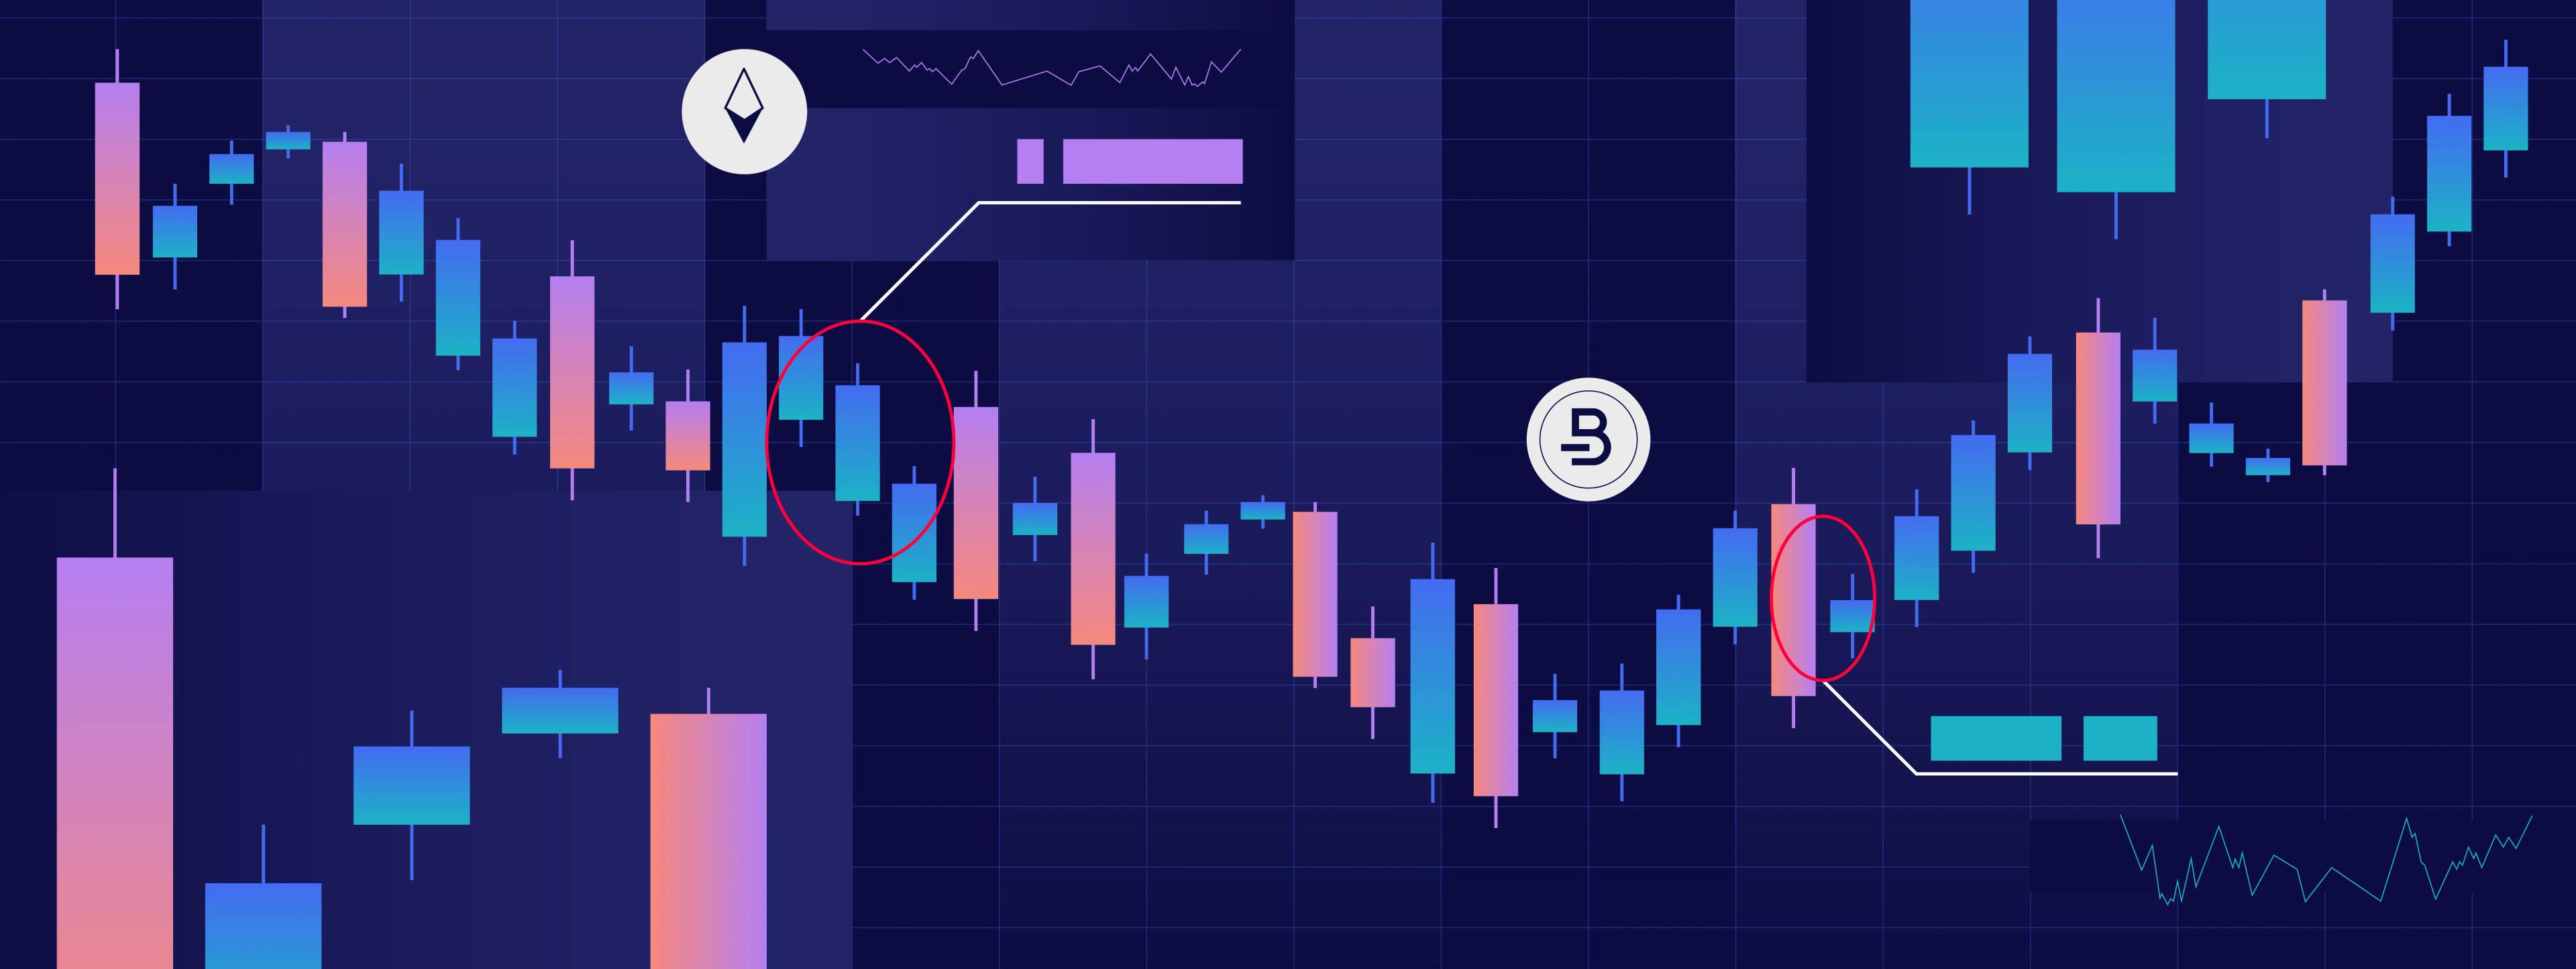 How to Read a Crypto chart if you’re a Complete Beginner?